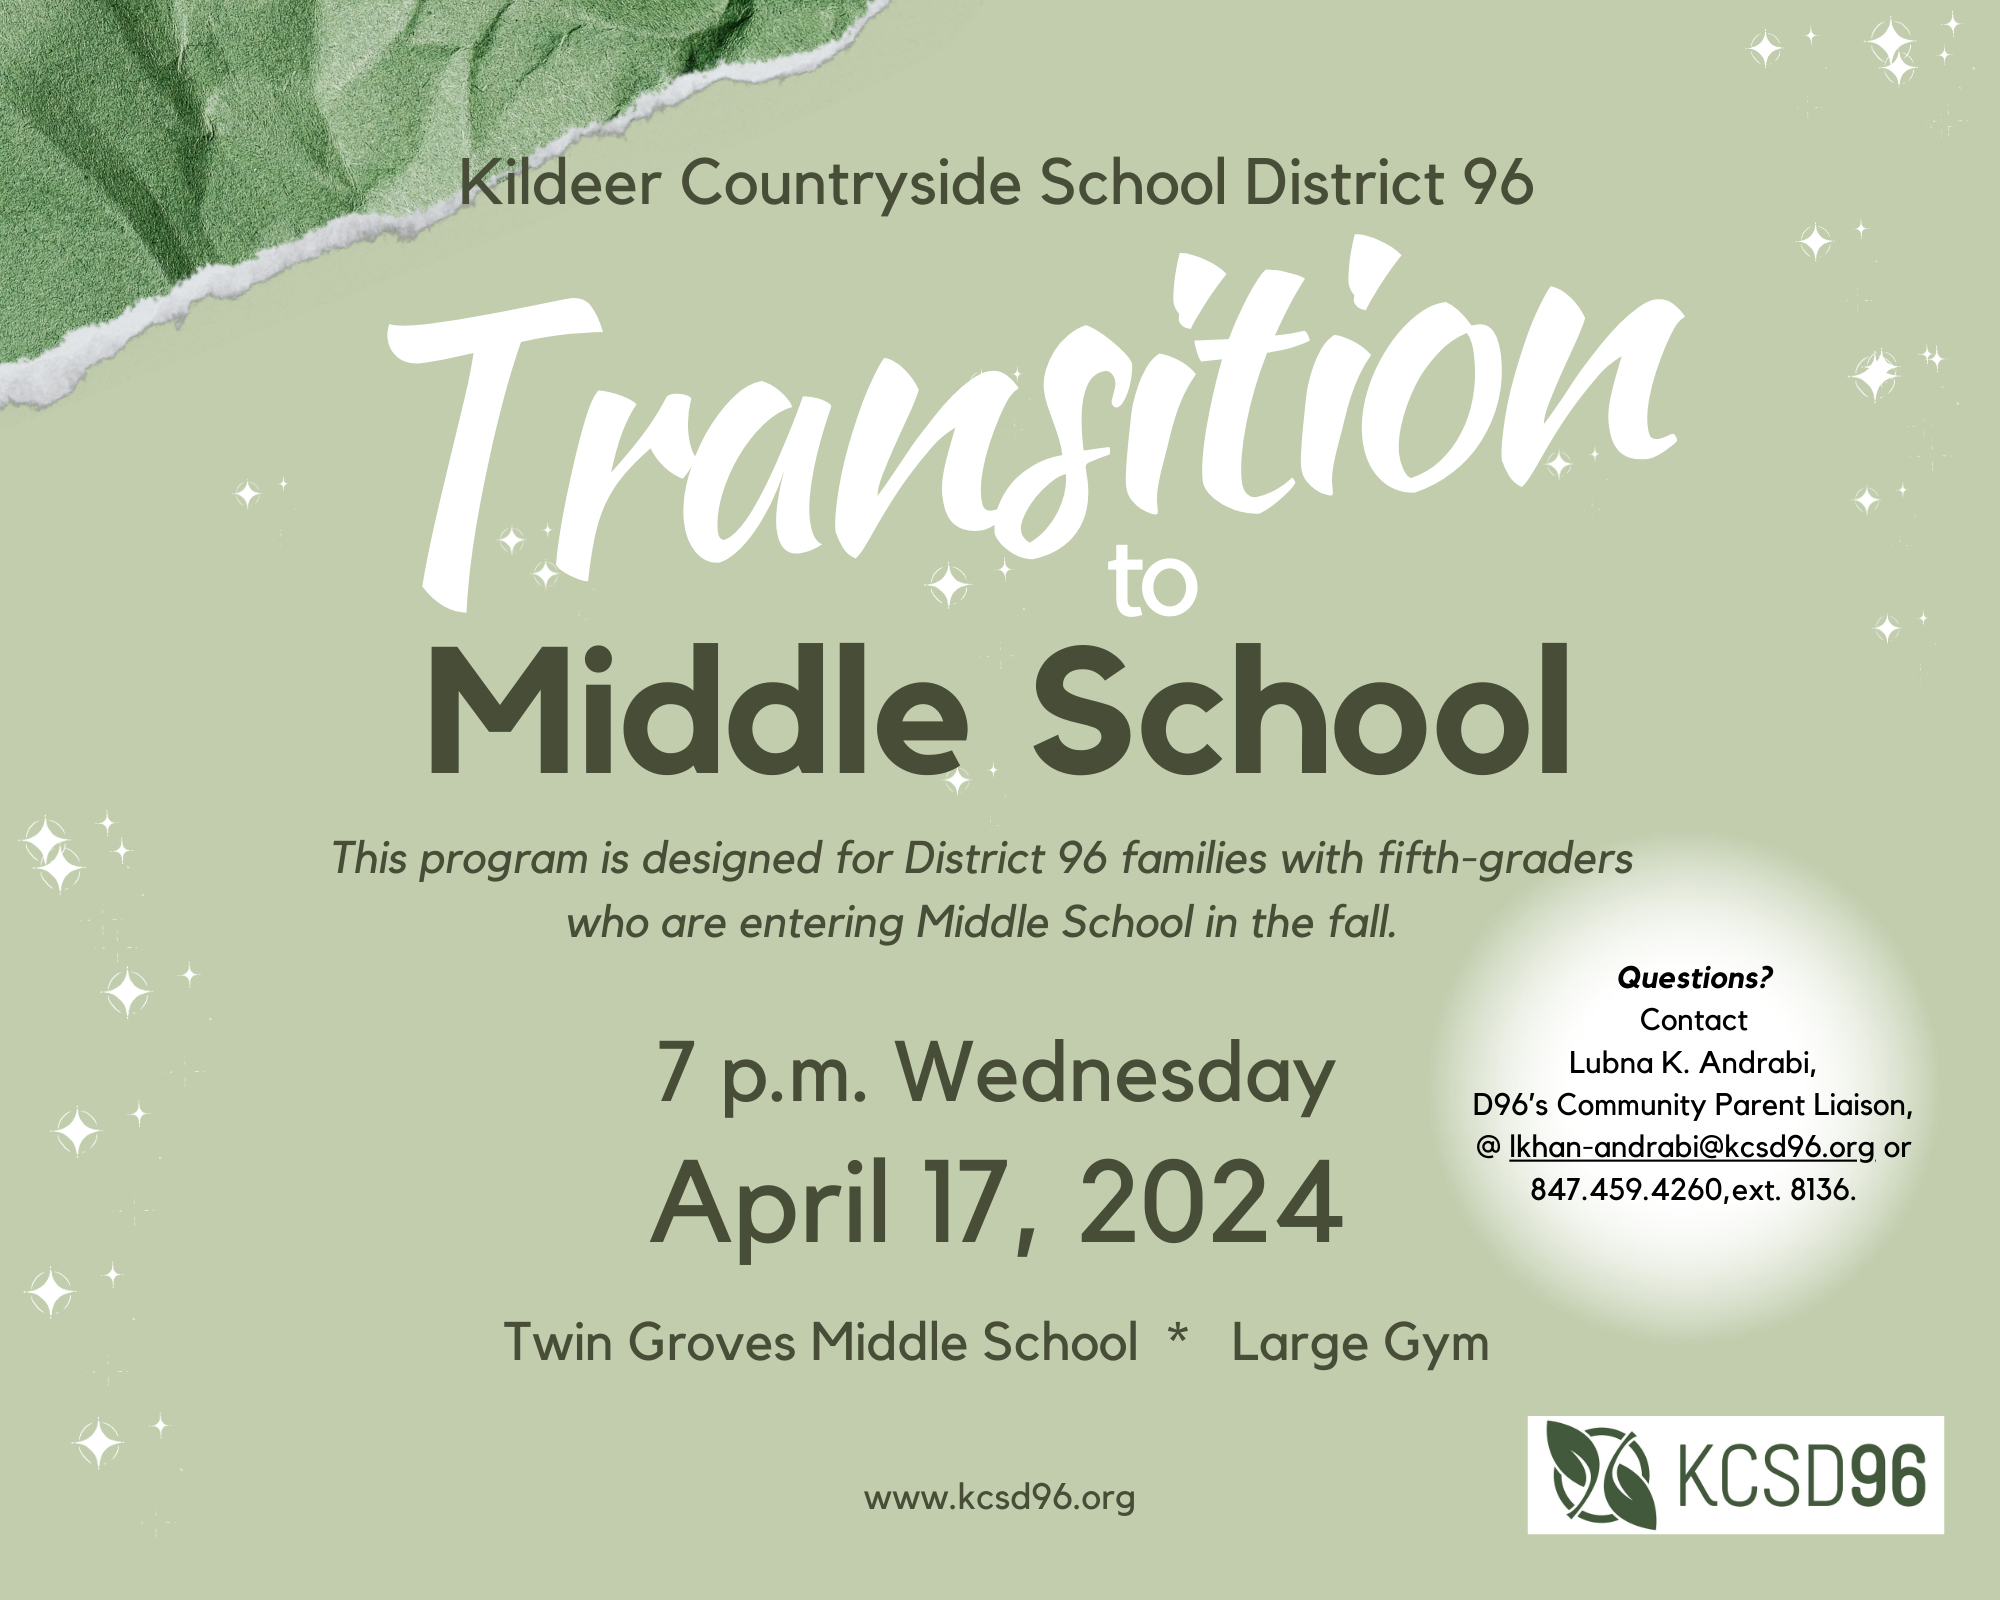 District 96 Transition to Middle School